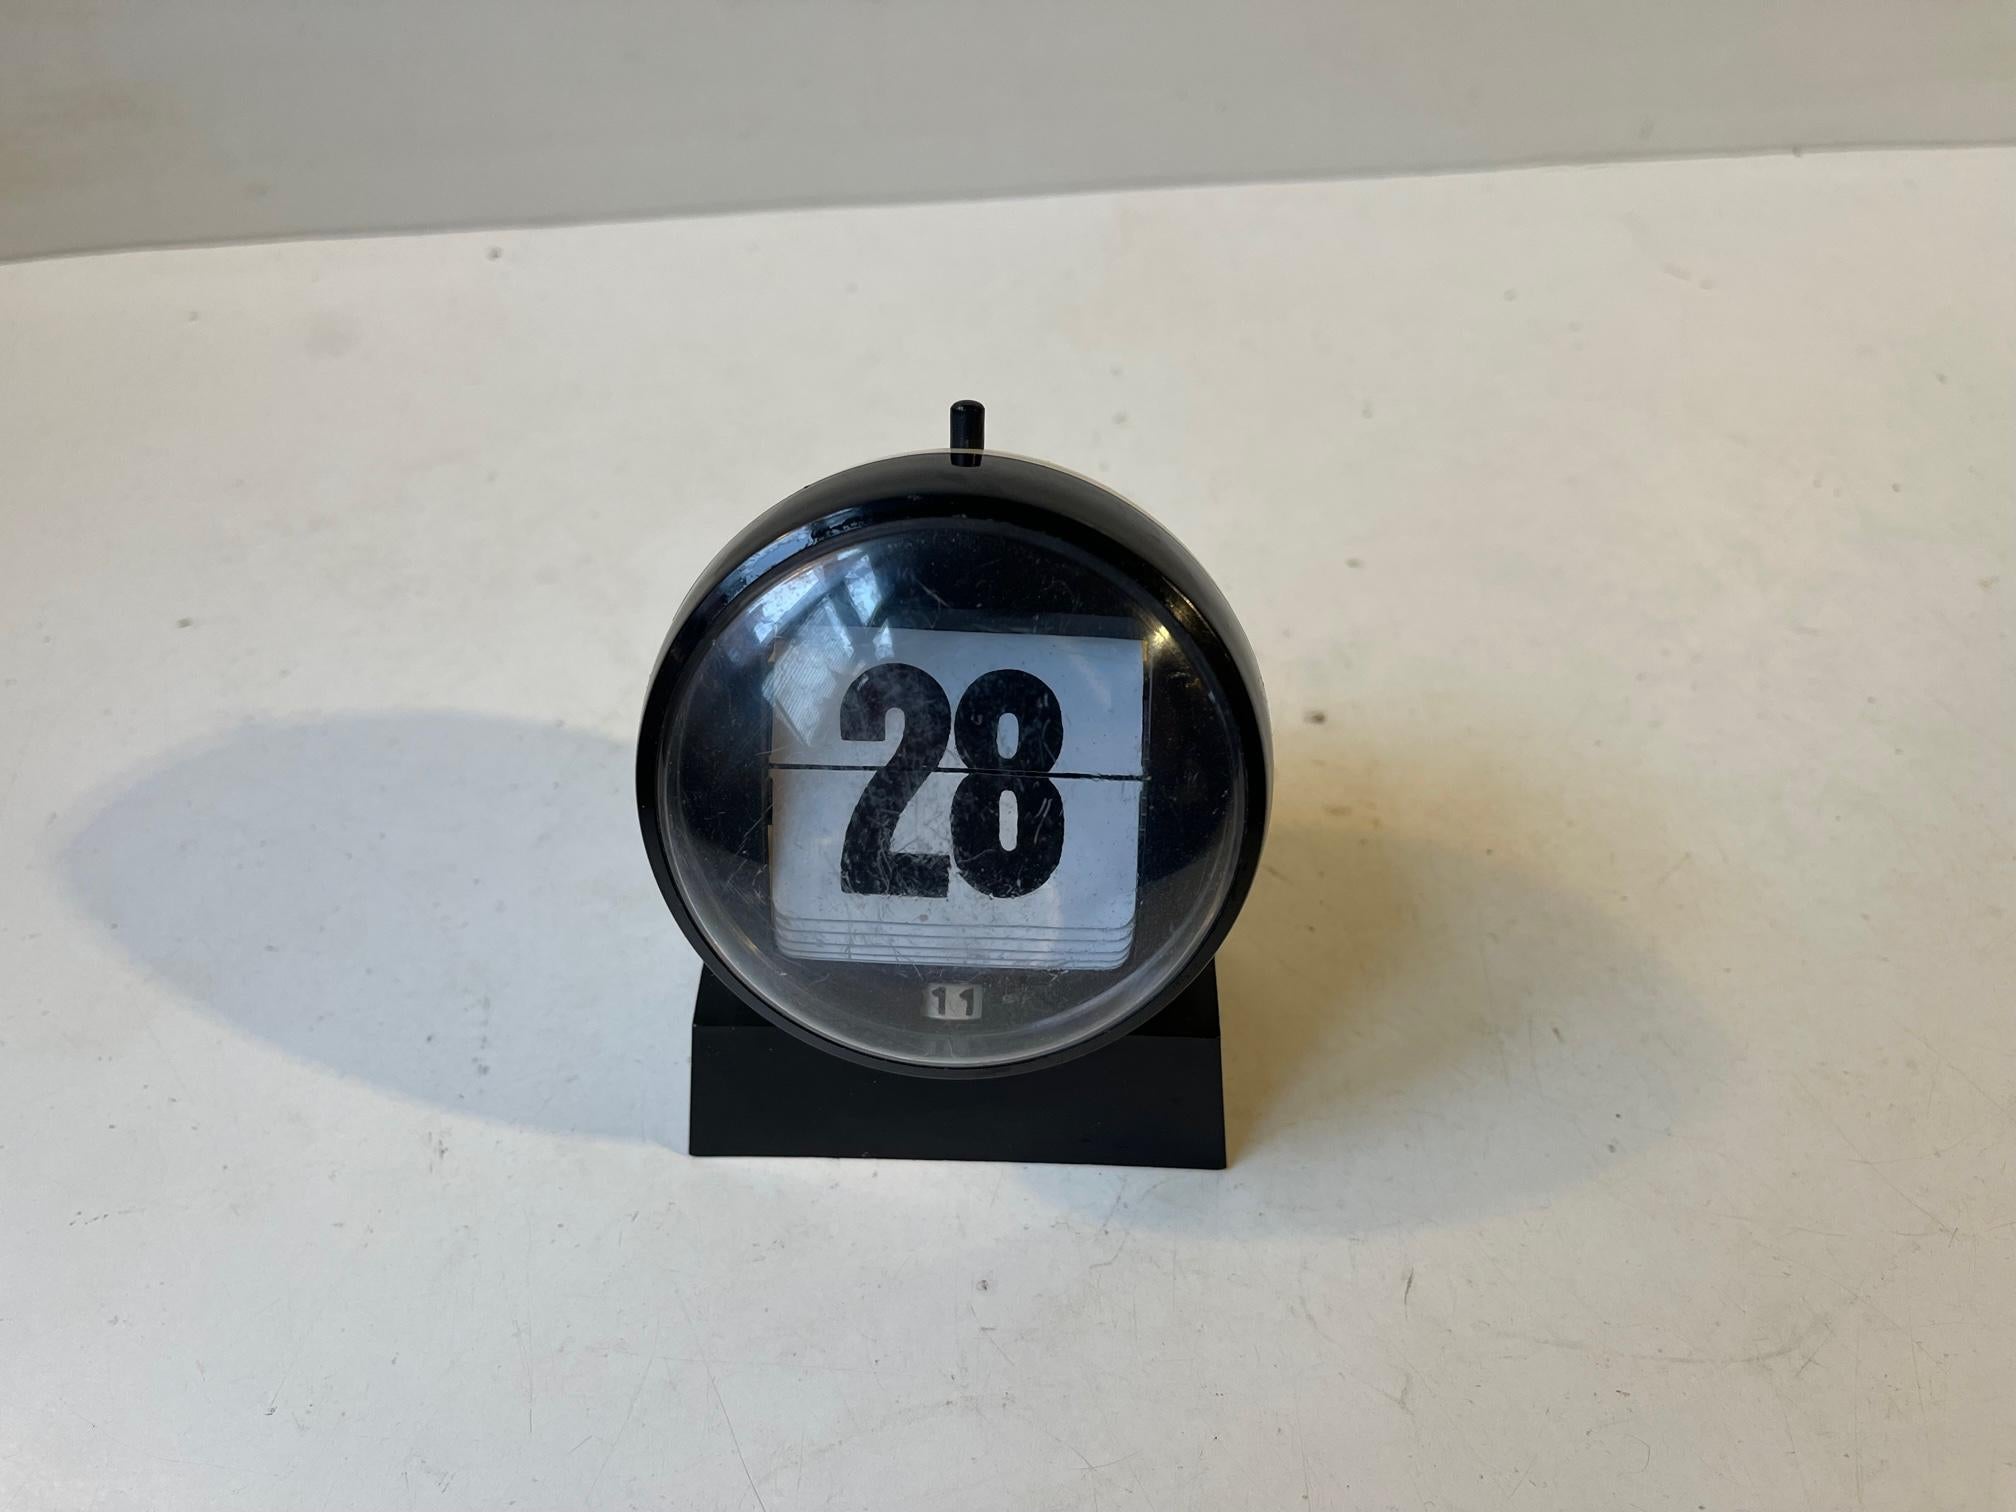 Often seen in 1960s-70s American movies this atomic perpetual flip calendar with manually set day and month has become an iconic desk piece among space age lovers. It was made in either Japan or Hong Kong in the 1960s or 70s. It made from molded